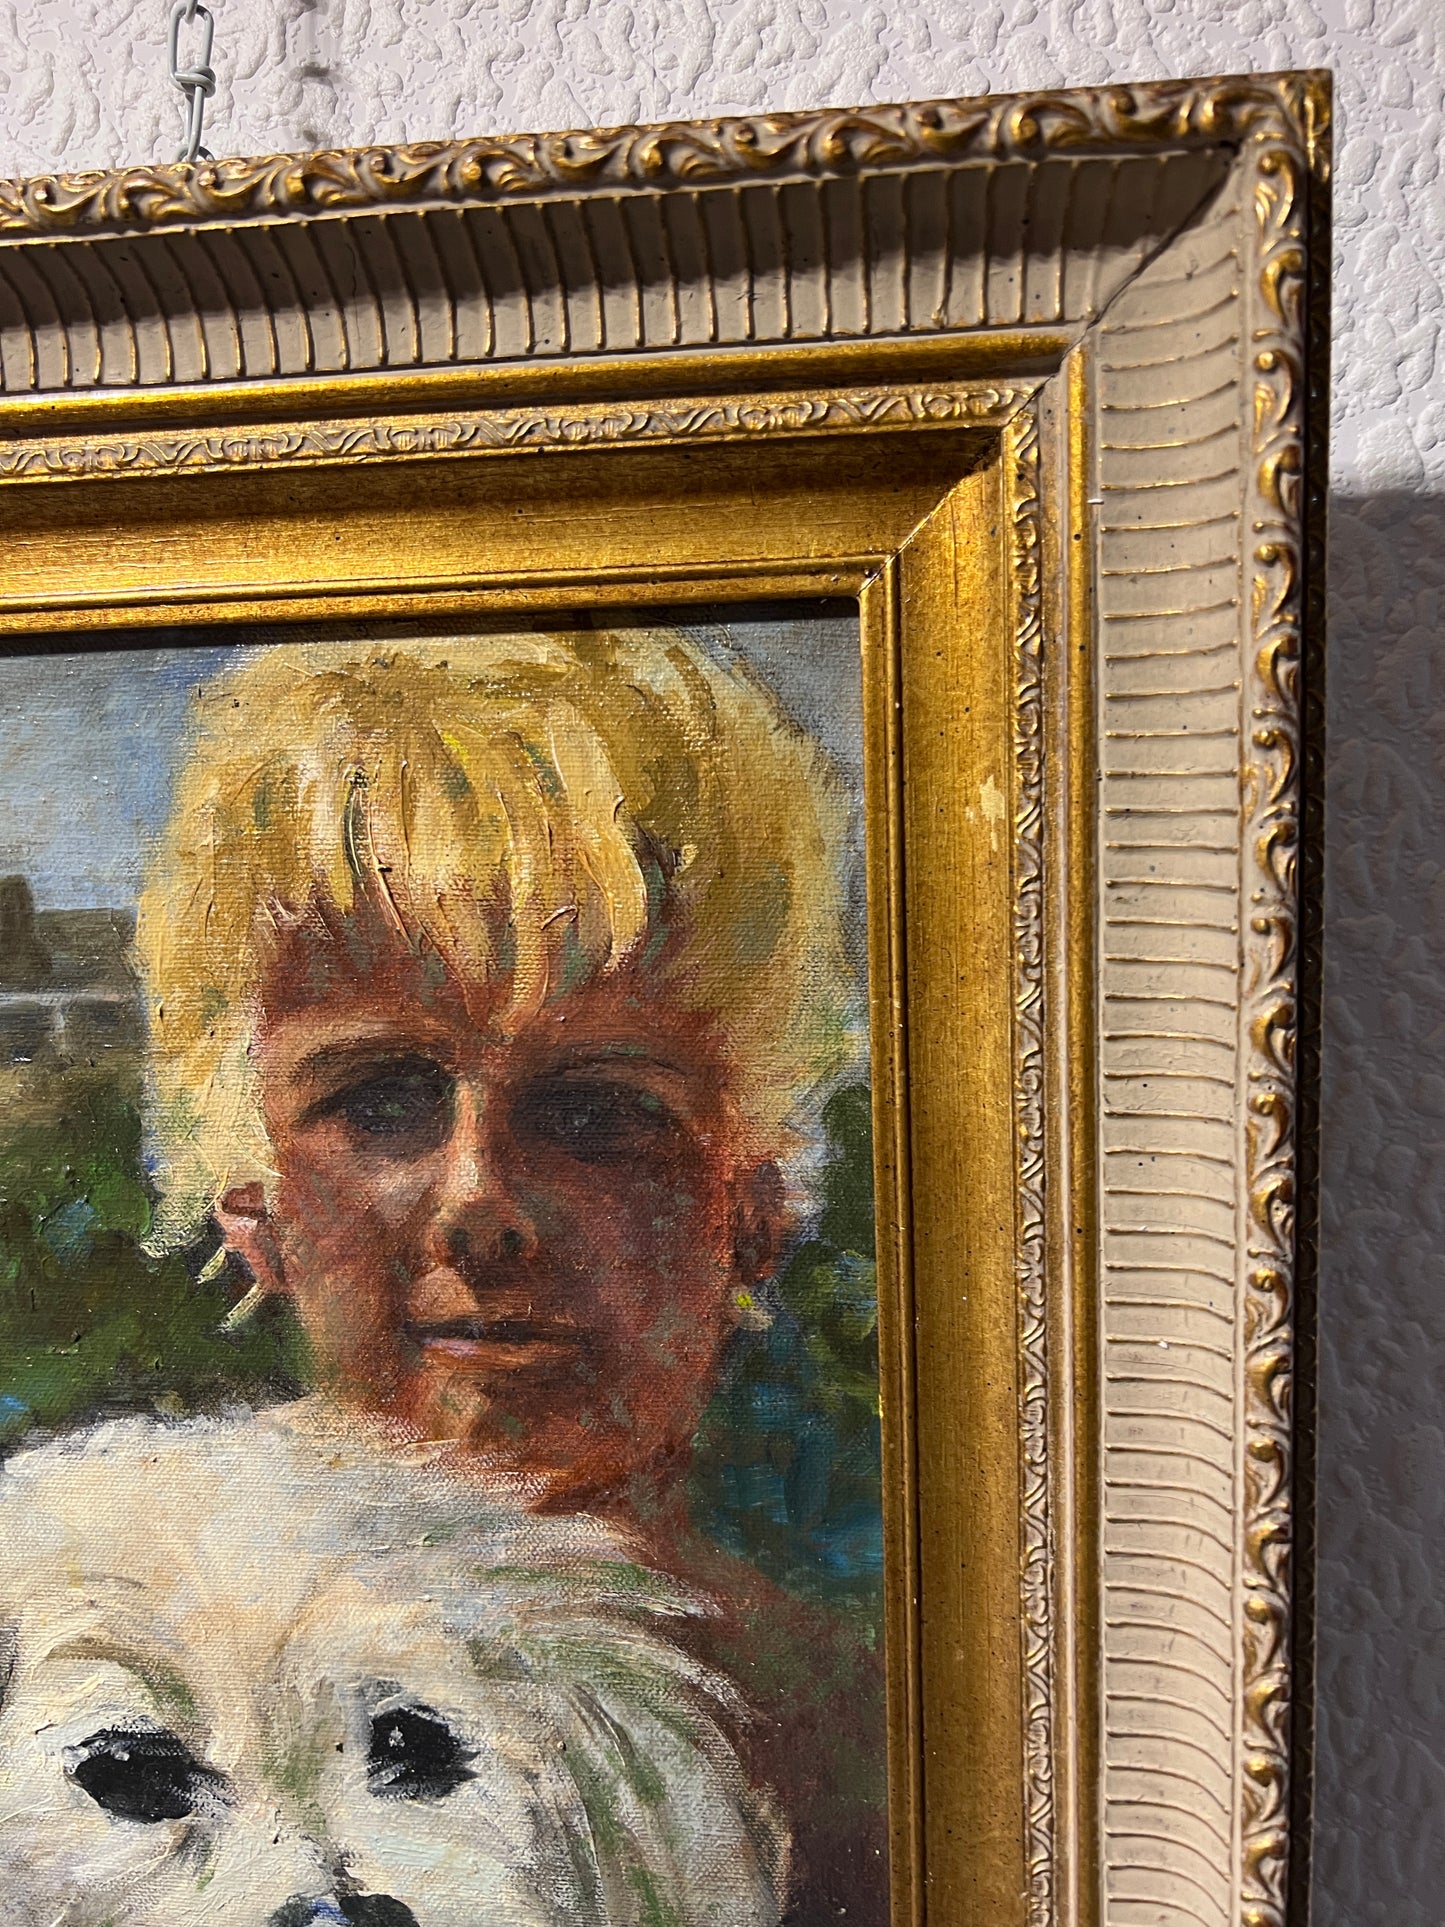 Original Oil Painting on Canvas, Portrait of a Boy with a Dog Signed Dated